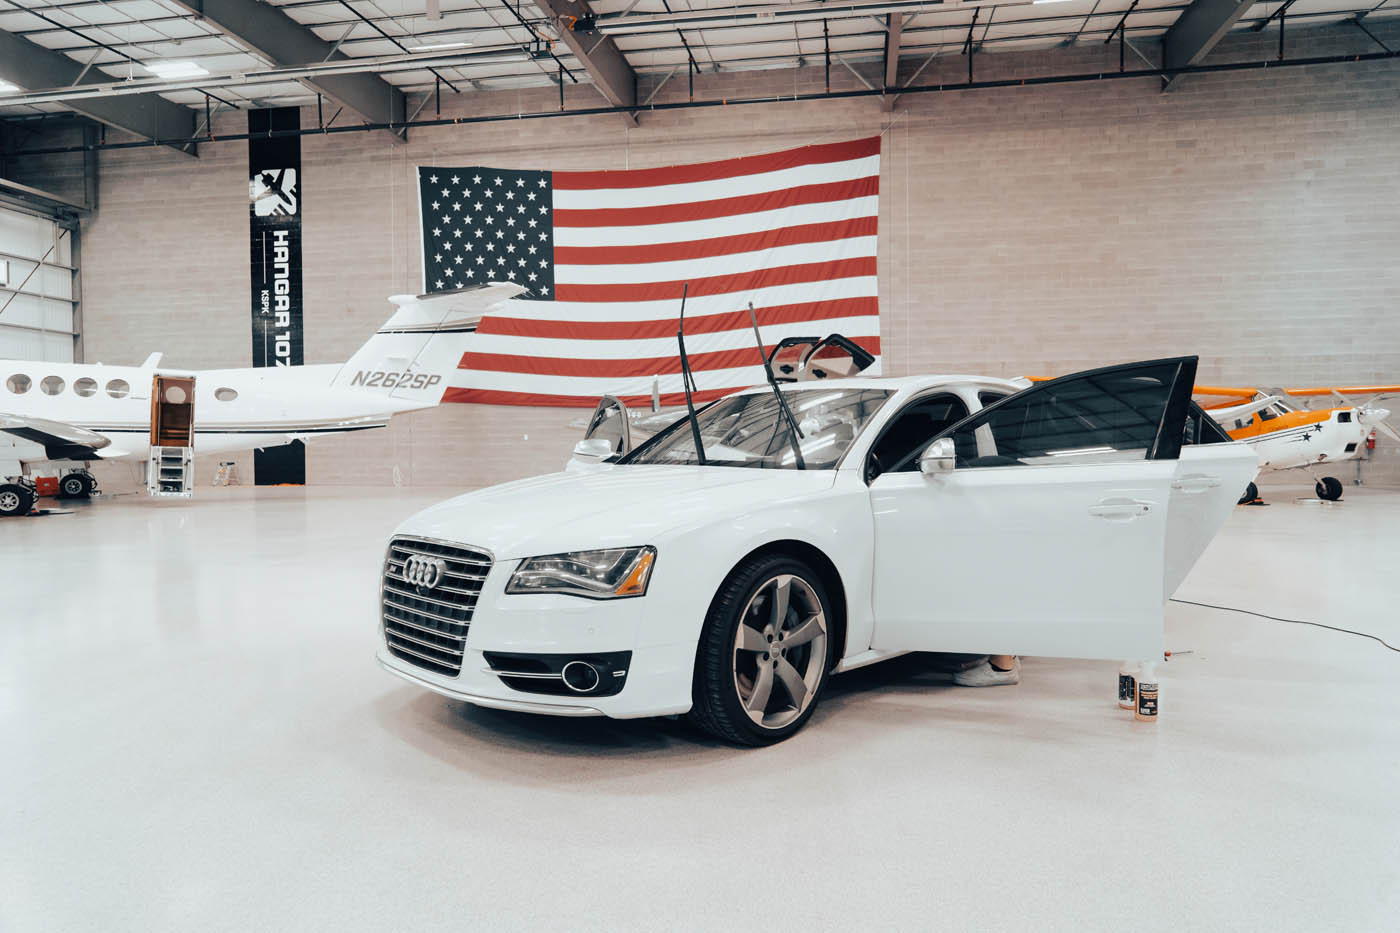 A white audi after recieving a car detailing service in Salt Lake City.